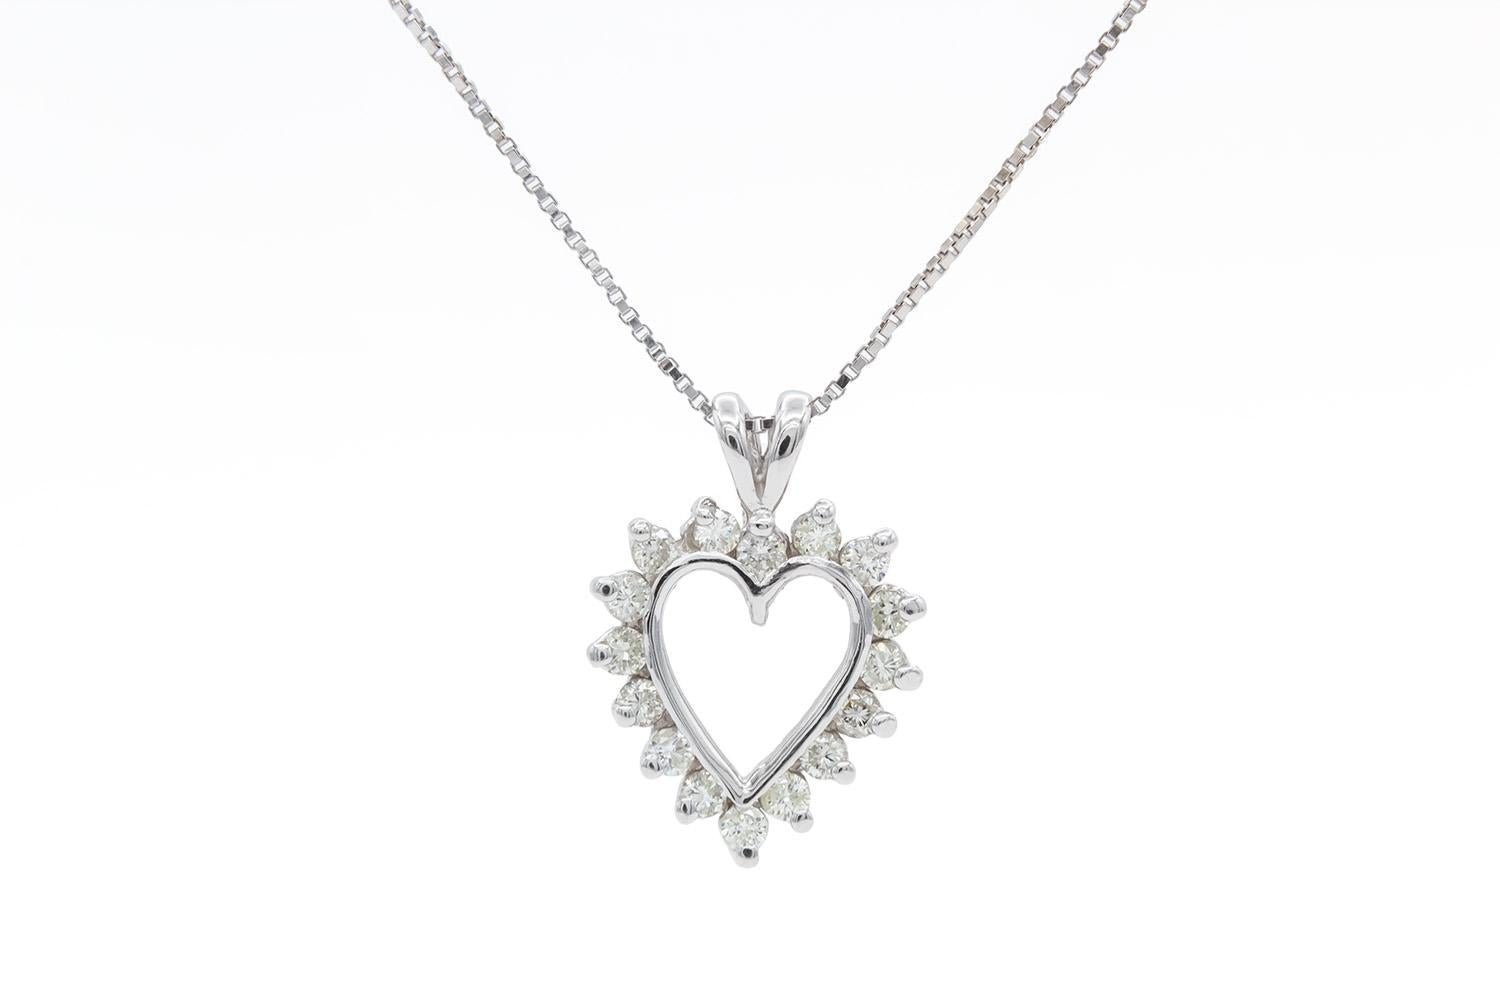 We are pleased to offer this 14k White Gold & Diamond Heart Silhouette Pendant Necklace. A timeless pendant crafted from dazzling round diamonds, celebrating the exquisite silhouette of your love. This is stunning 14k white gold pendant is set with